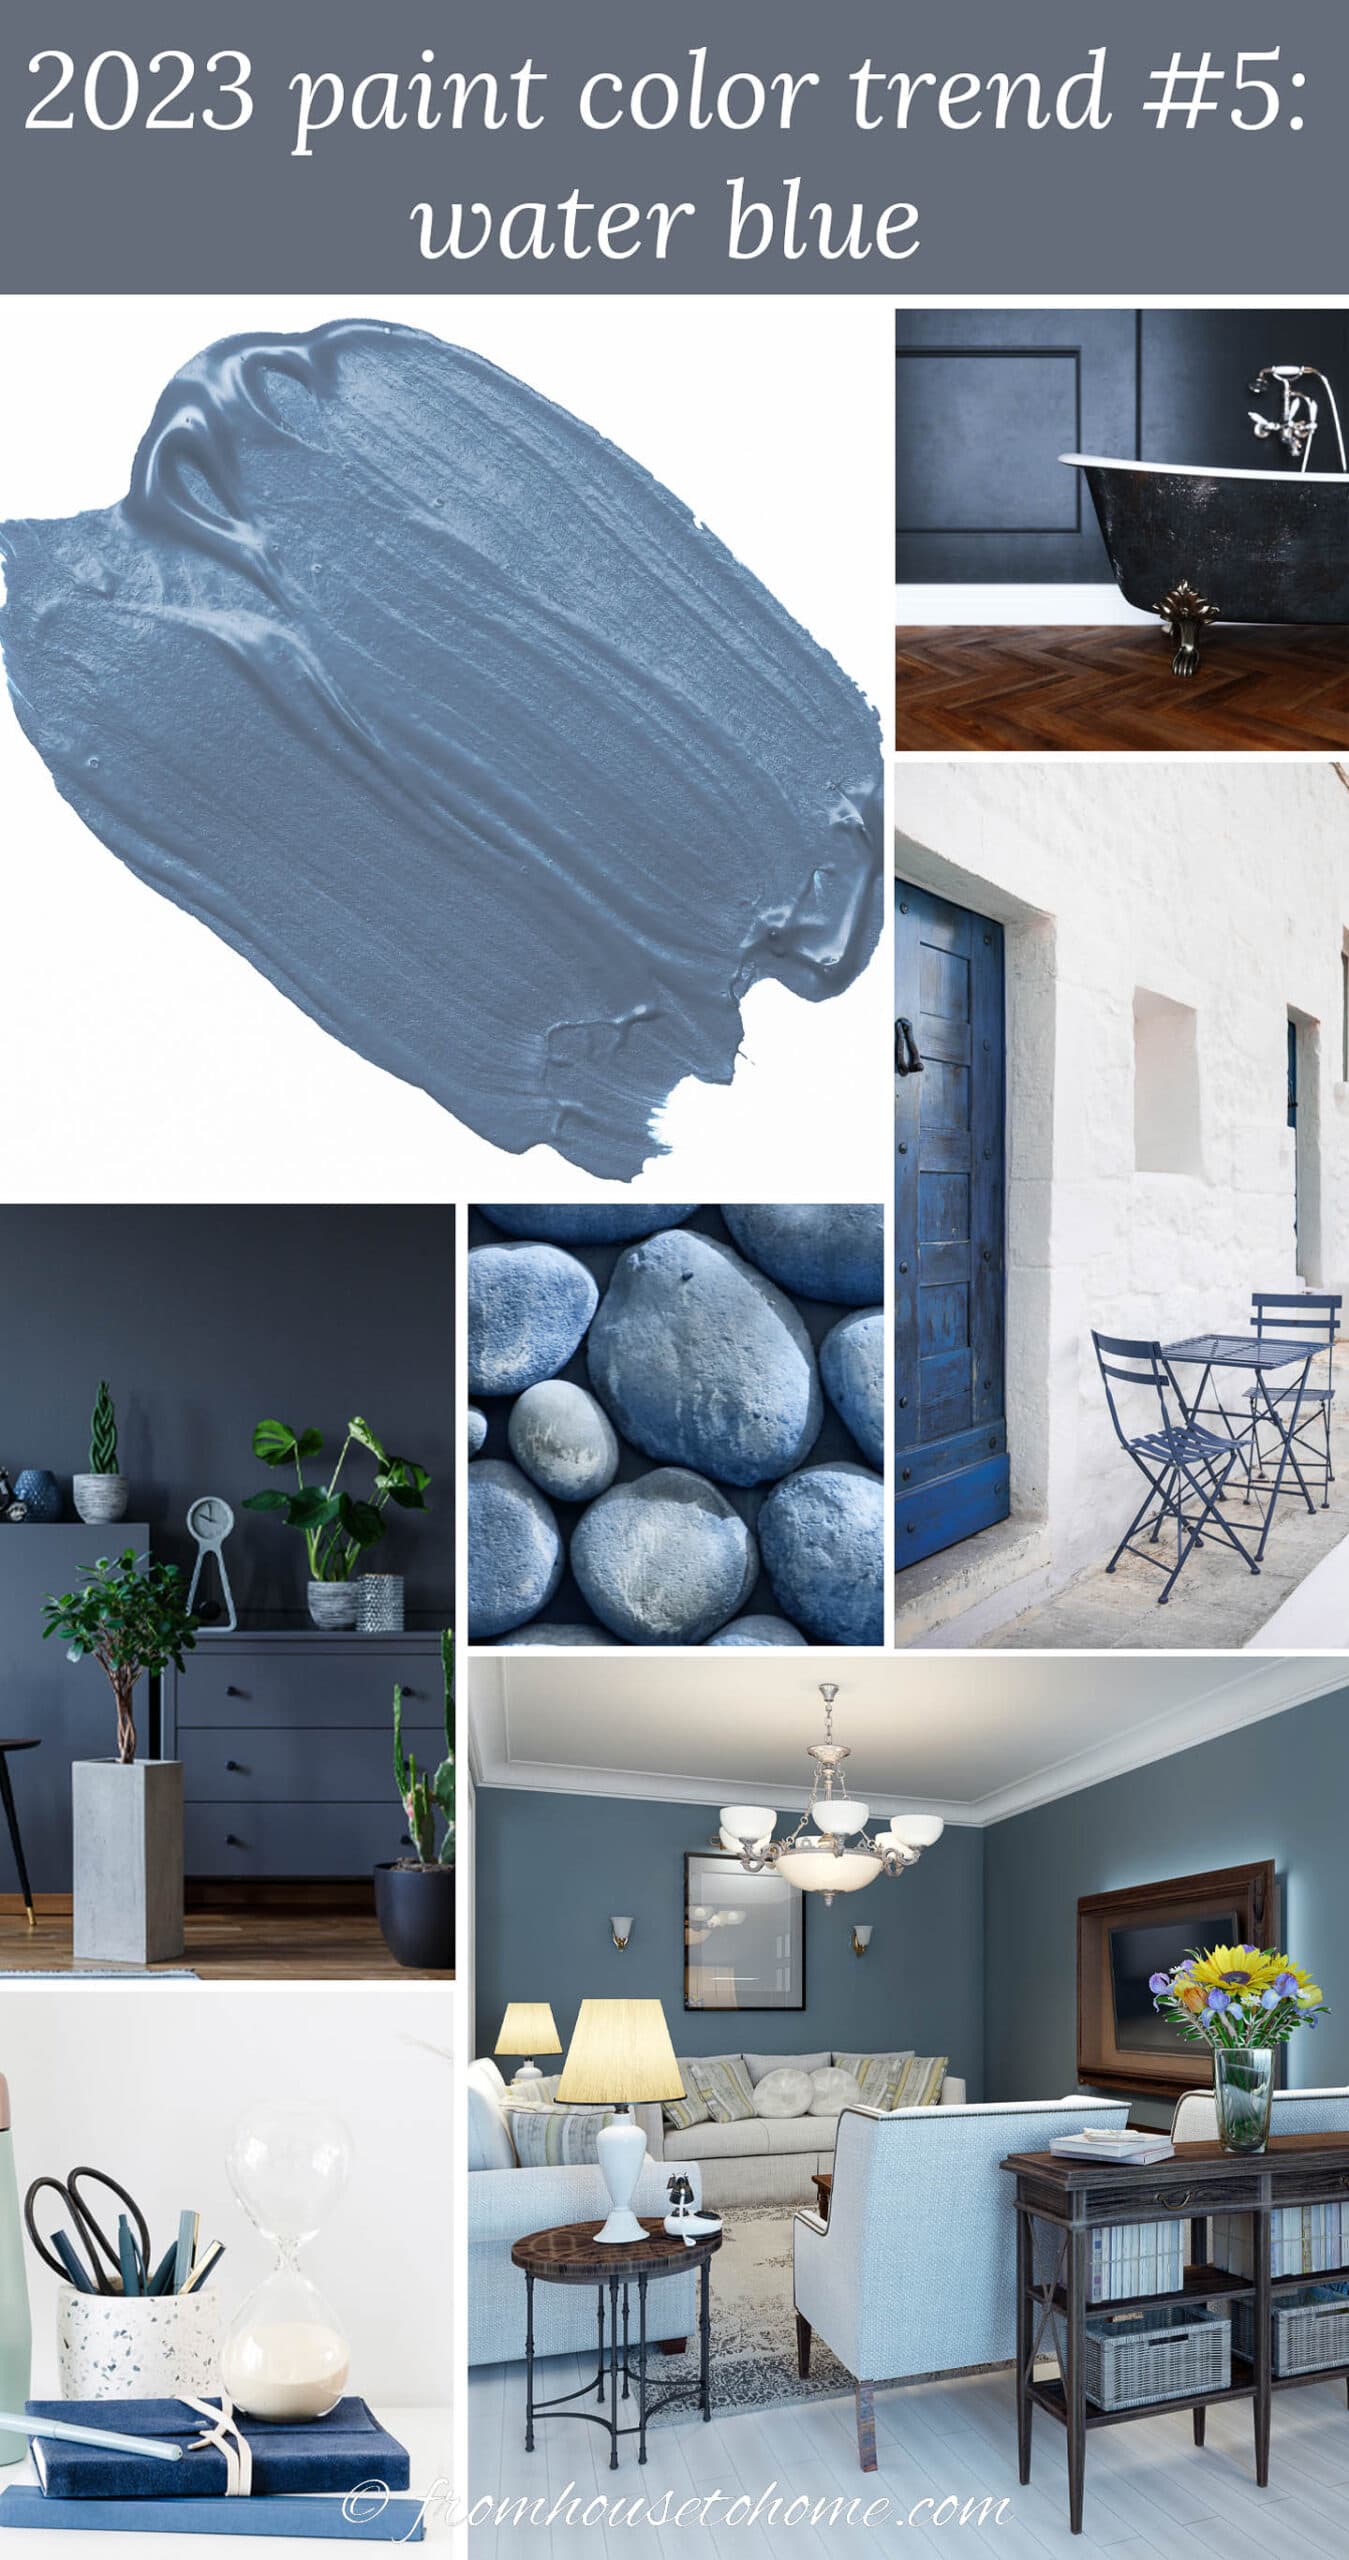 2020 Home Decor and Paint Color Trends